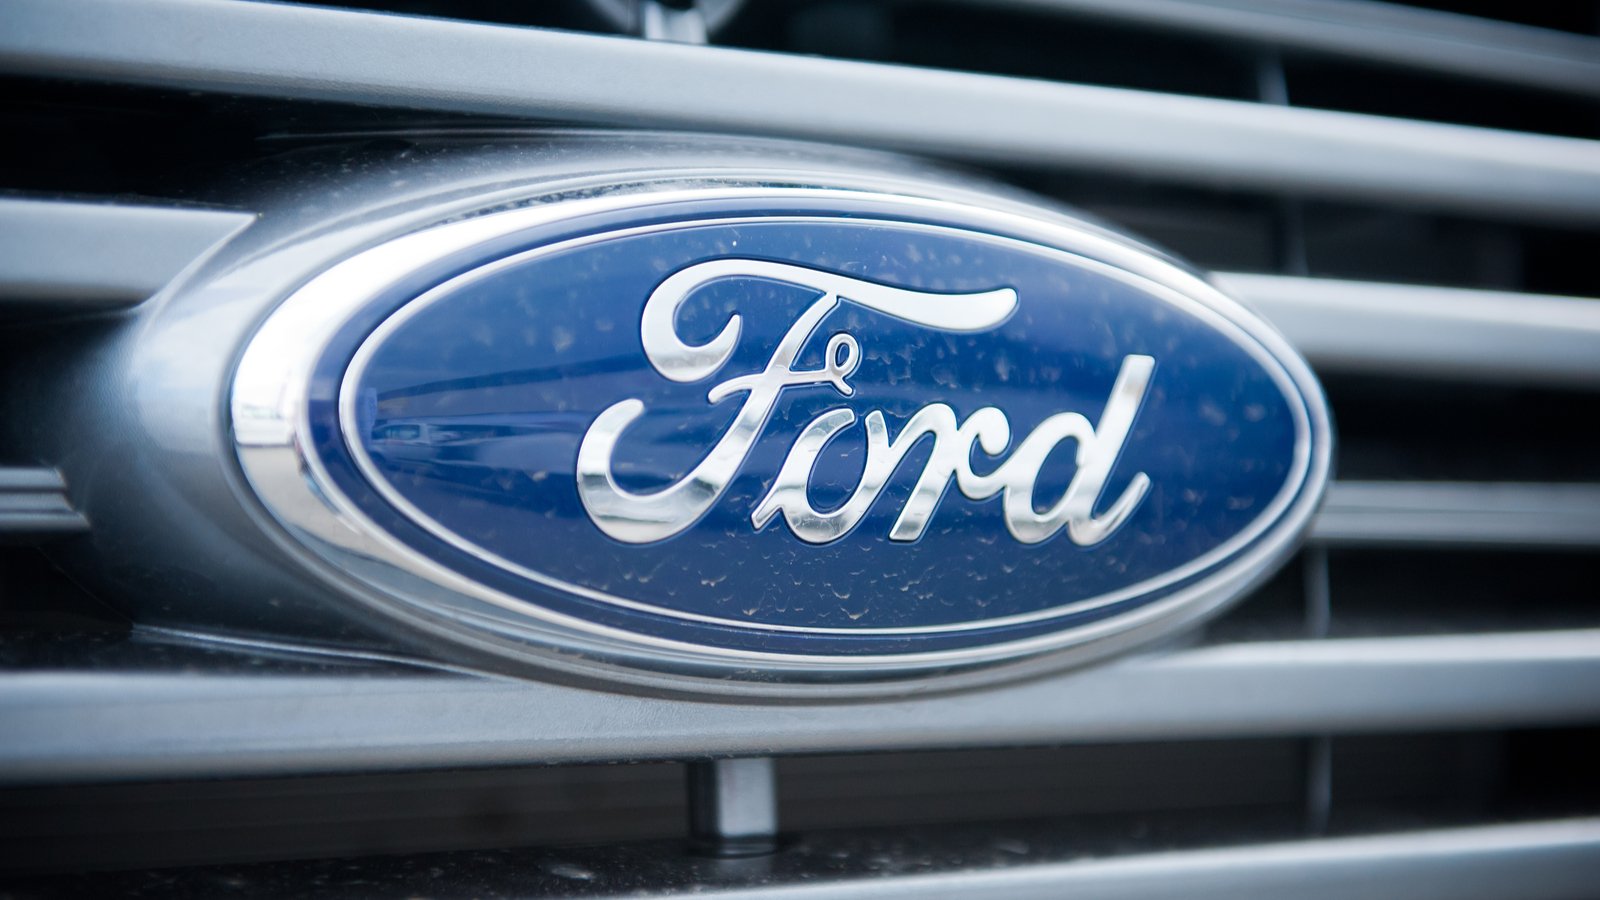 Ford (F) logo badge on grill of car